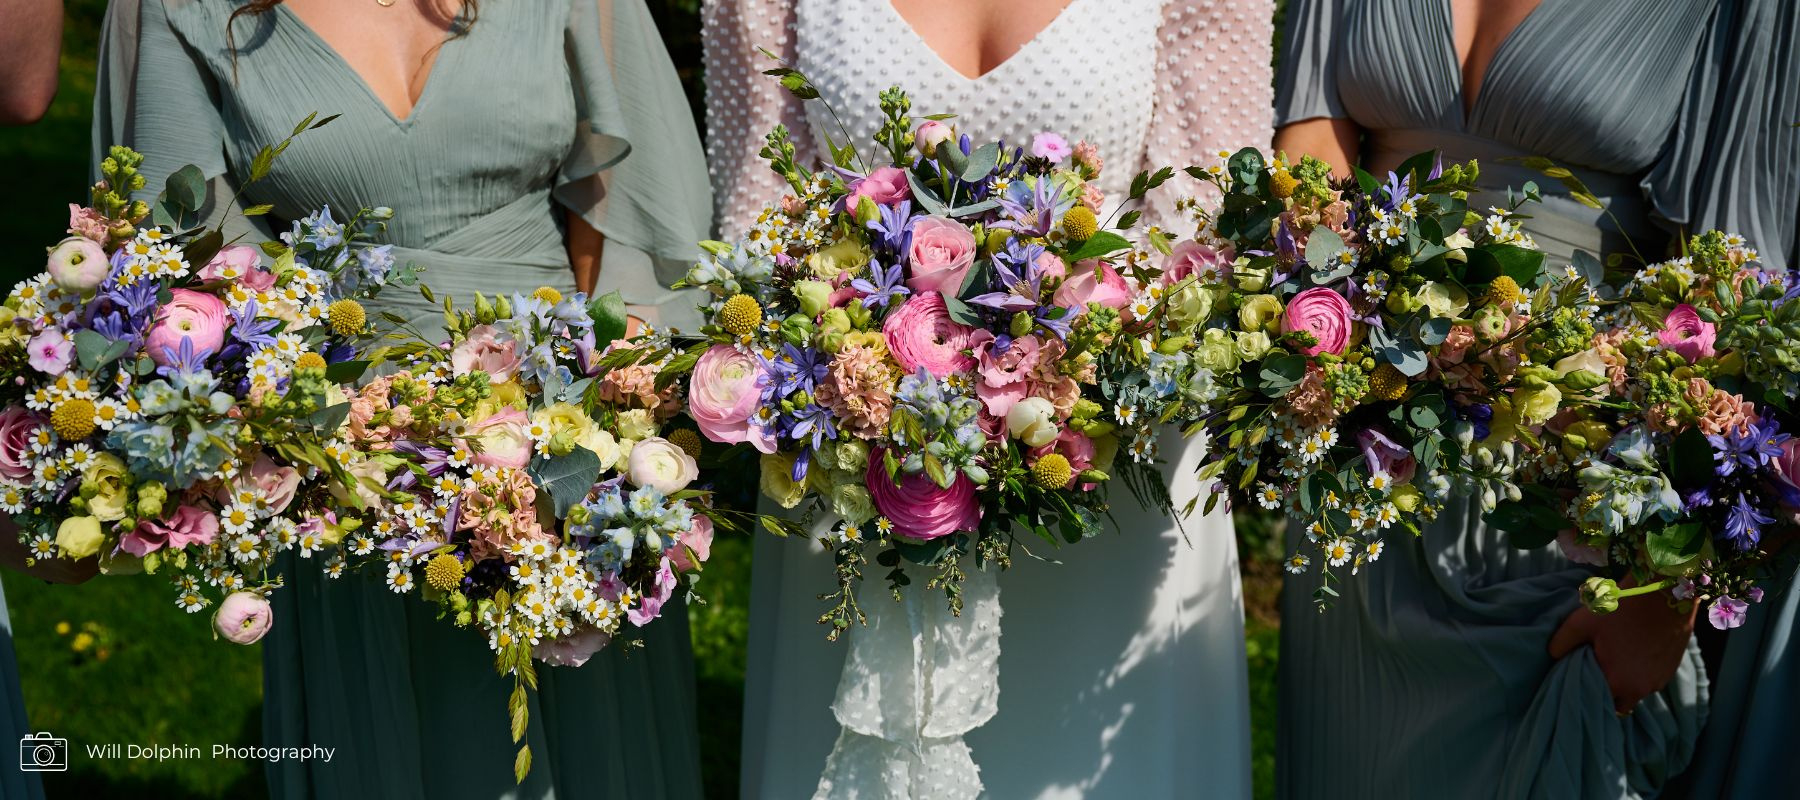 Bride and bridesmaids holding bouquets together. Spring pink, lilac and blue bouquets with pops of daisies